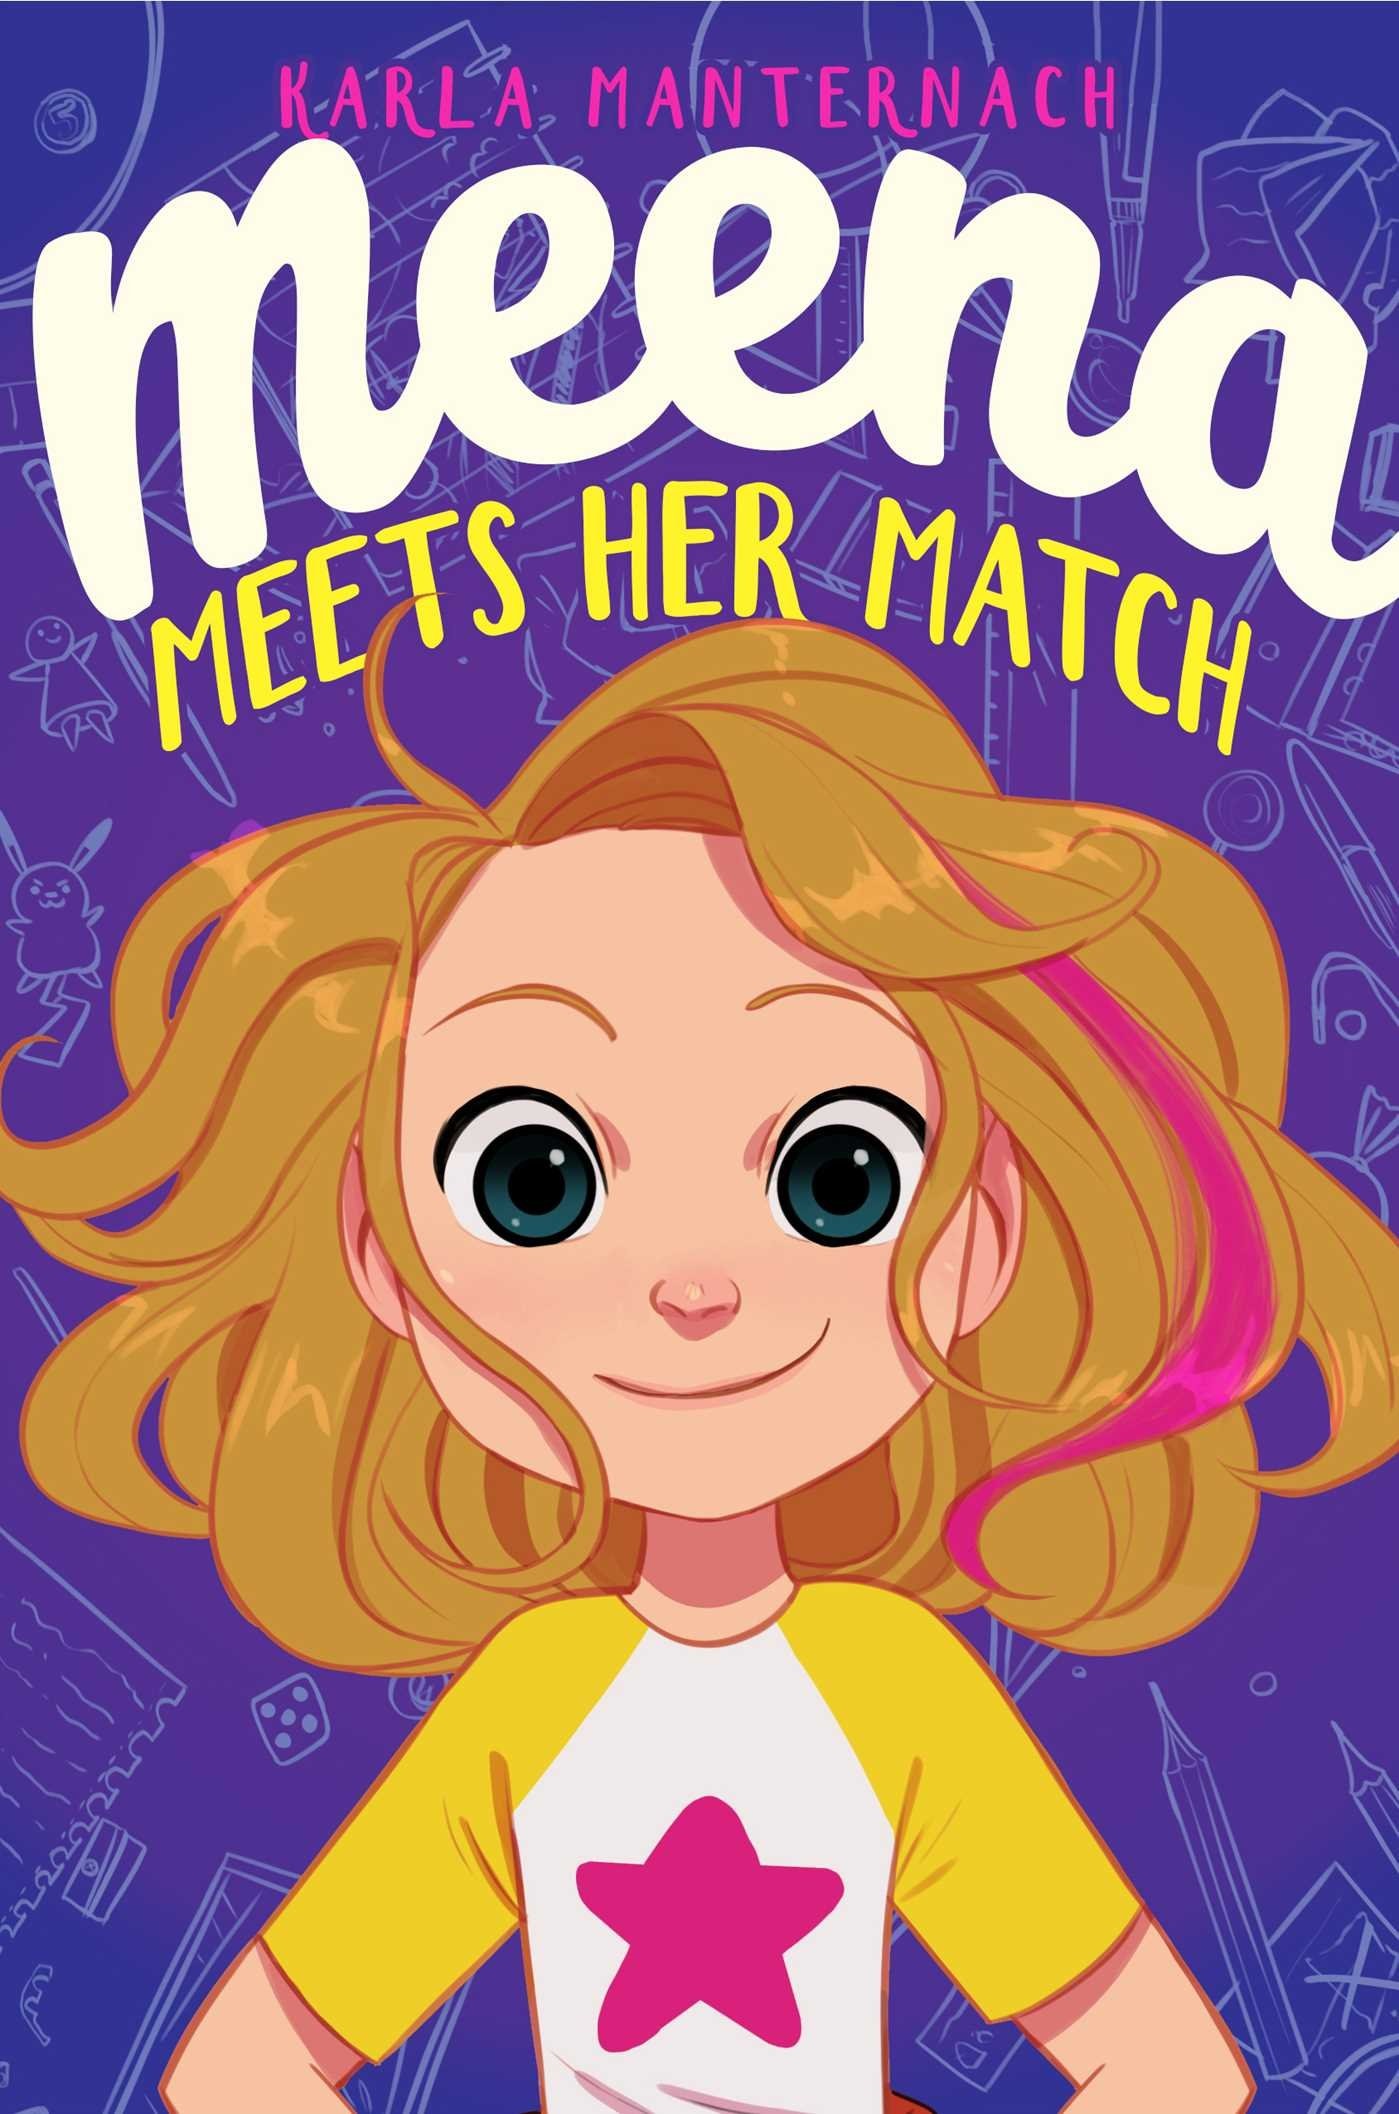 Book Cover, Meena Meets Her Match by Karla Manternach.